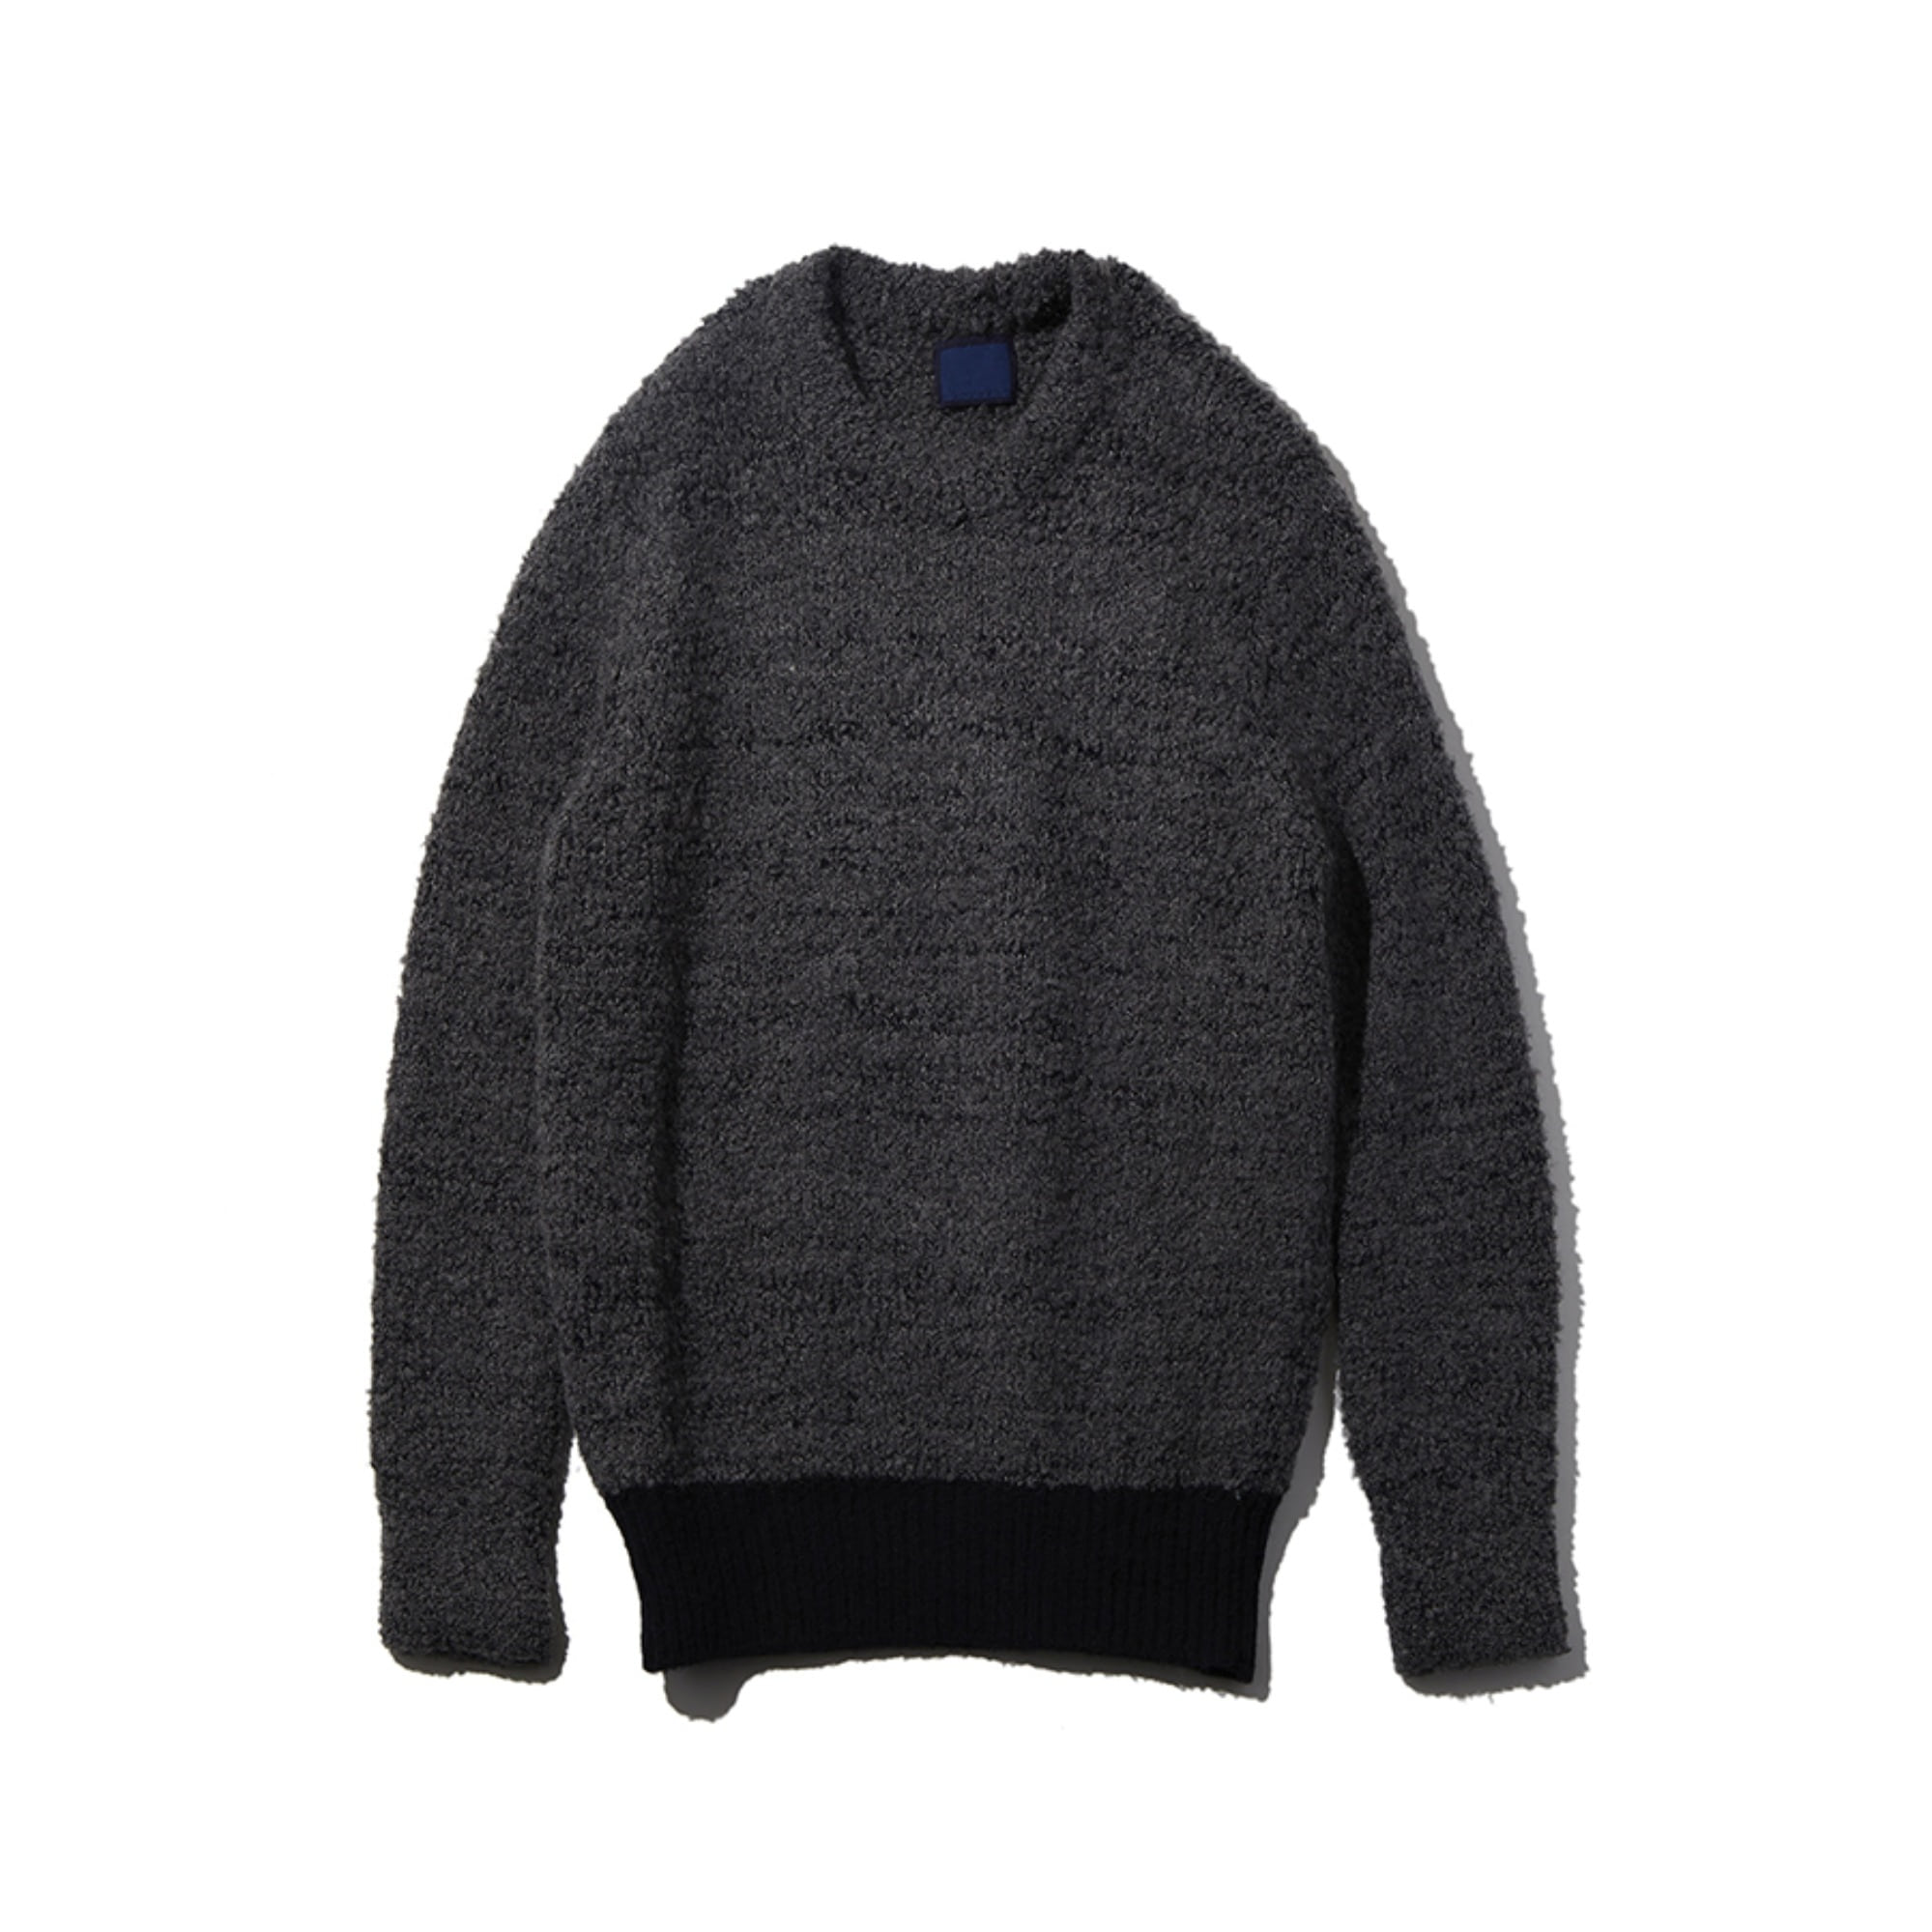 THE BOUCLE SWEATER (GREY)